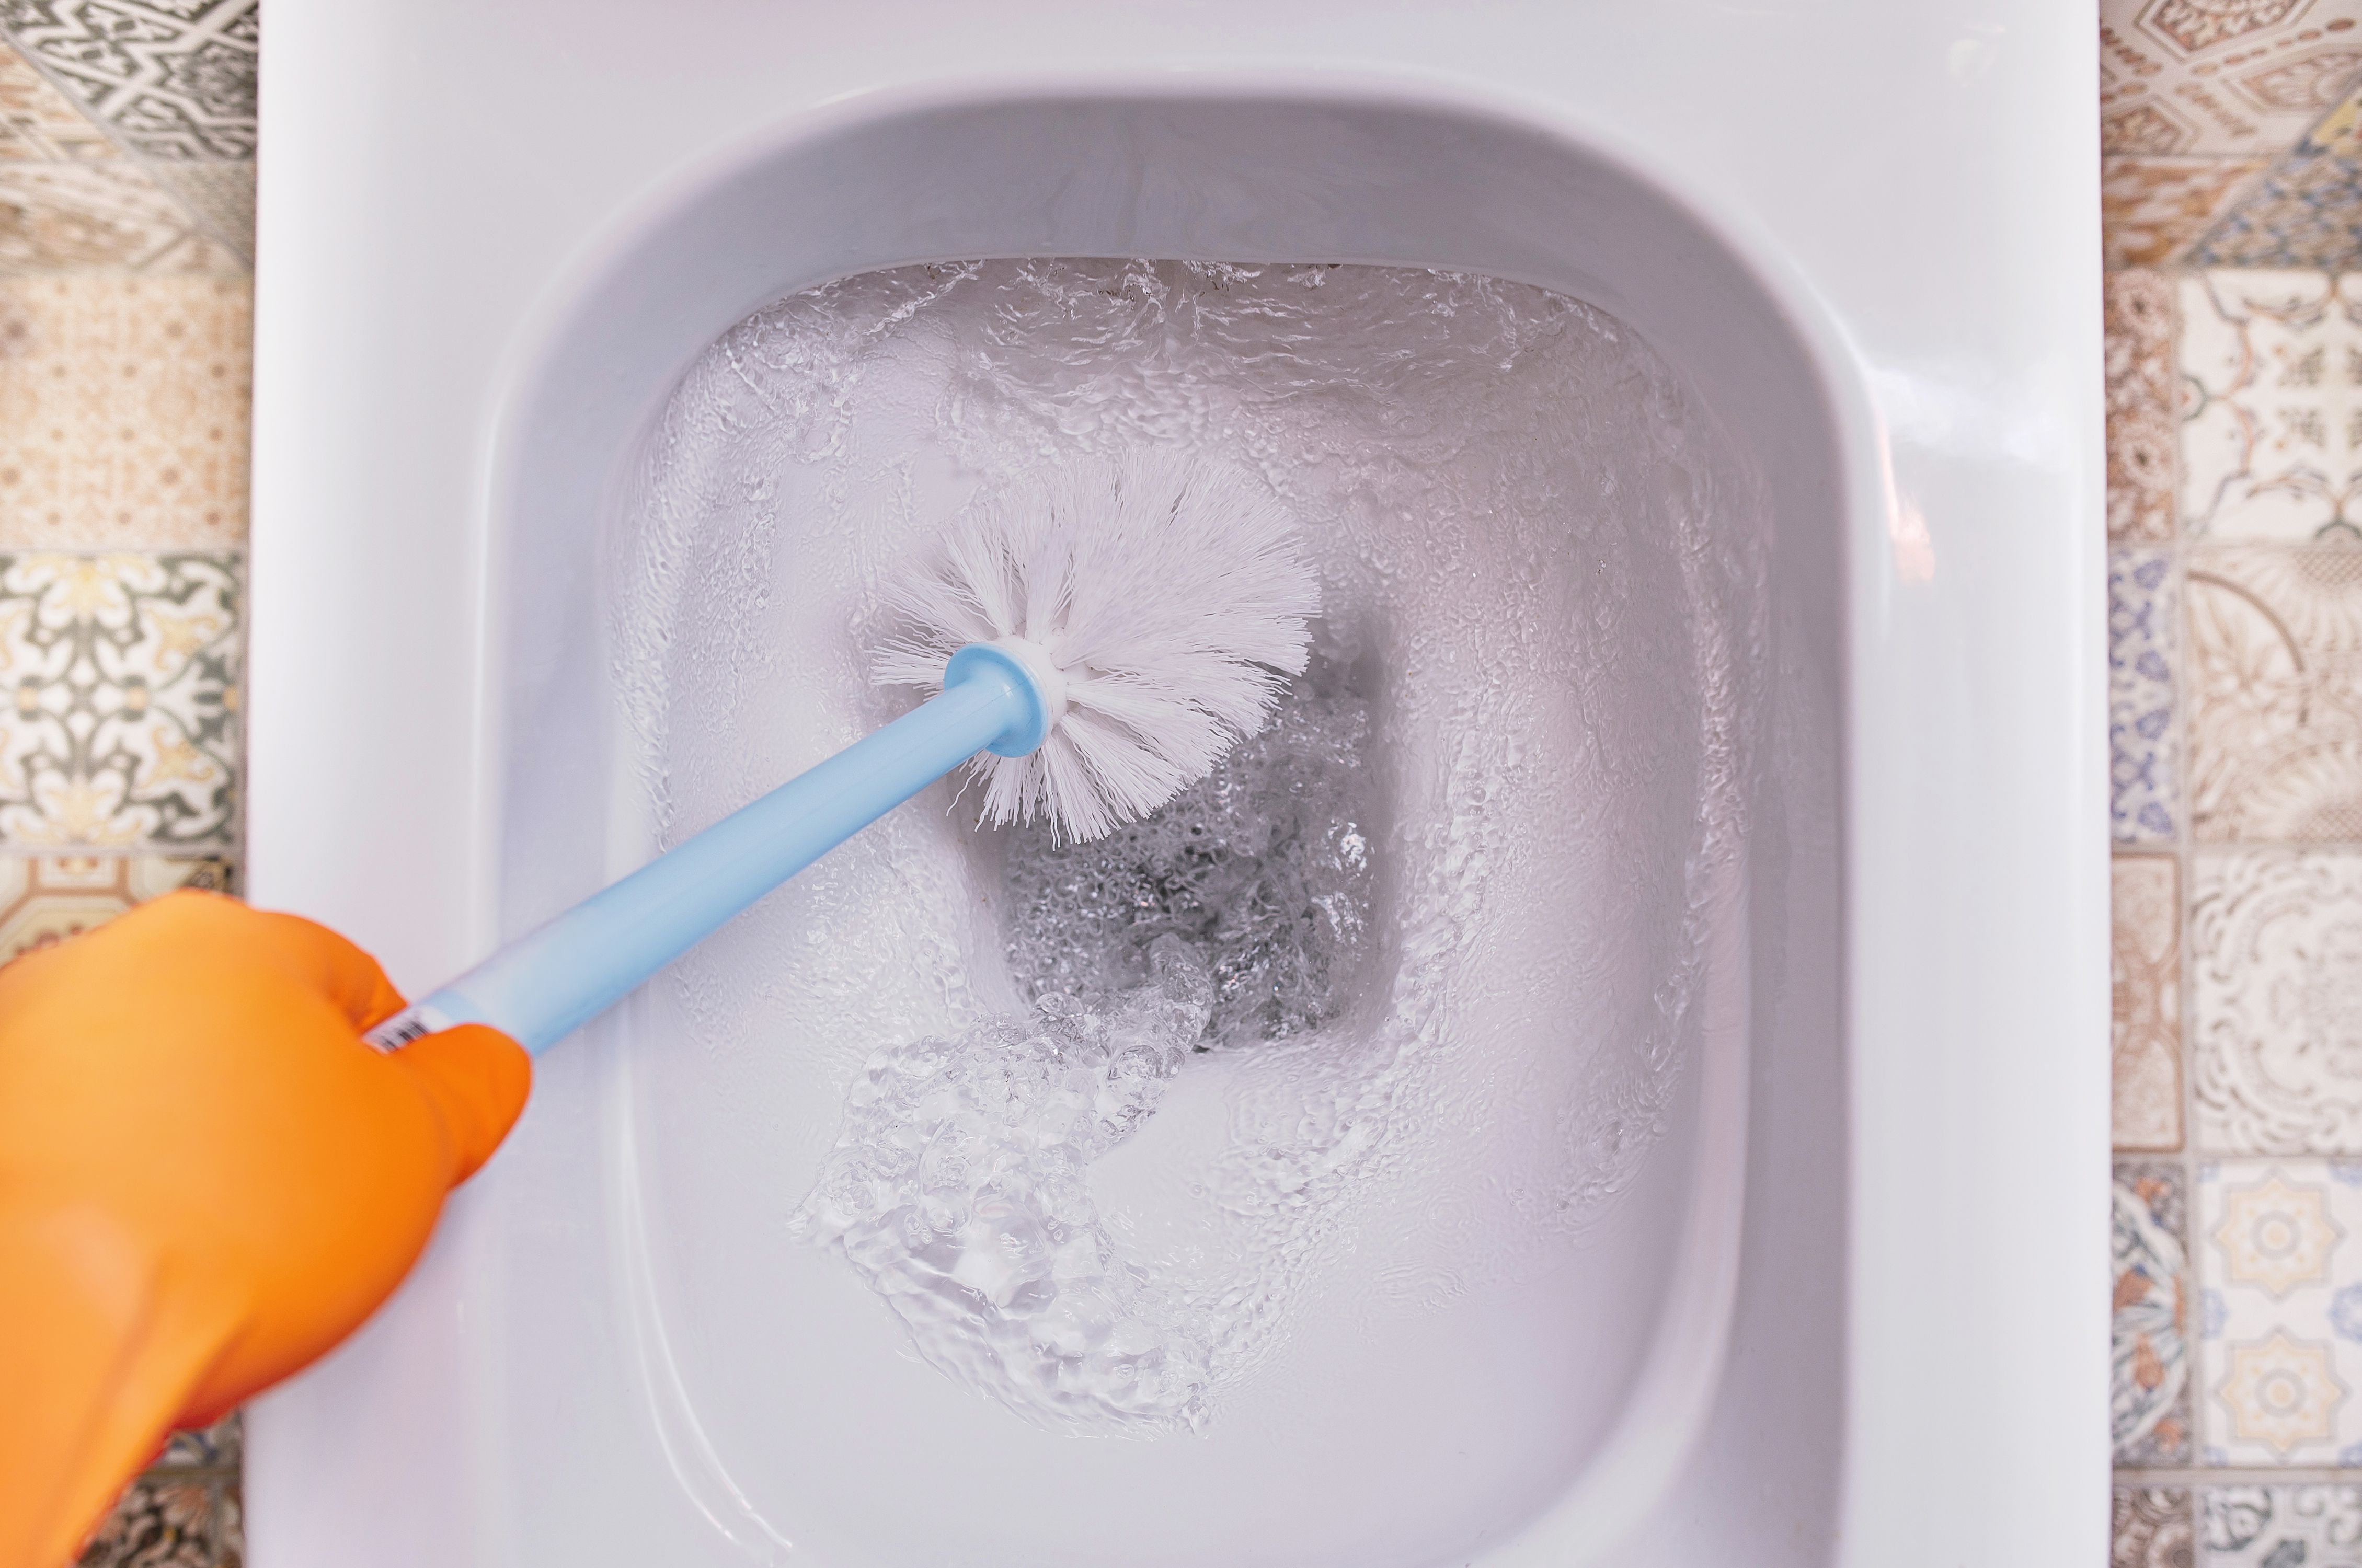 The Proper Way to Clean a Toilet Brush and Holder